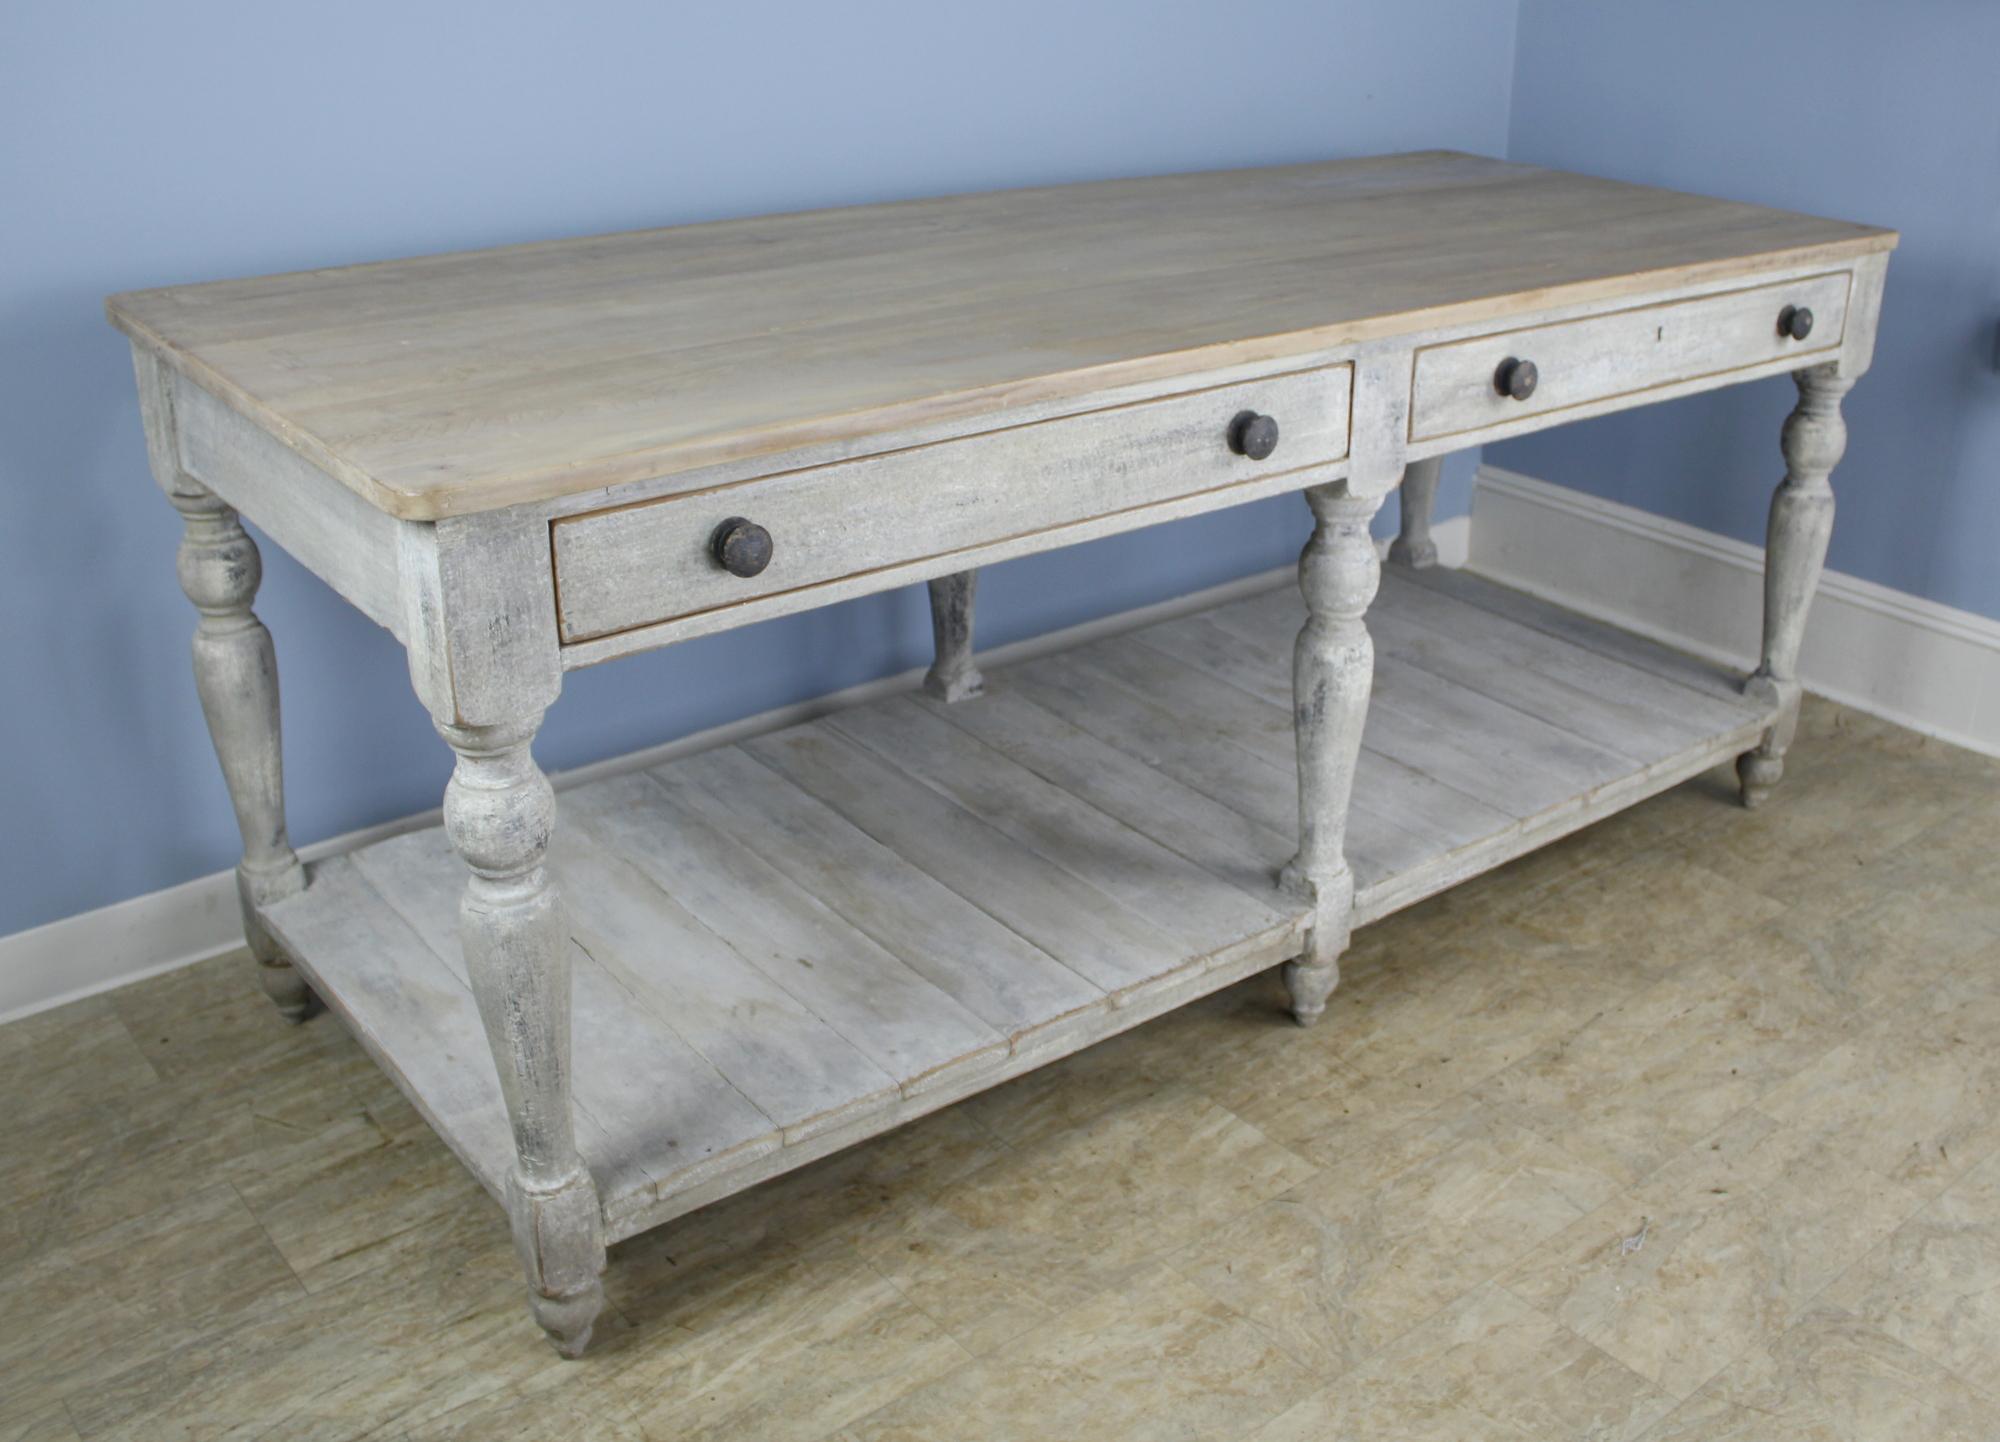 A fabulous prep or draper's table, newly painted for a distressed look. The top has been bleached for a clean appearance. The two wide drawers open and close easily and snugly. This can stand on it's own as a room divider or work table, or would be